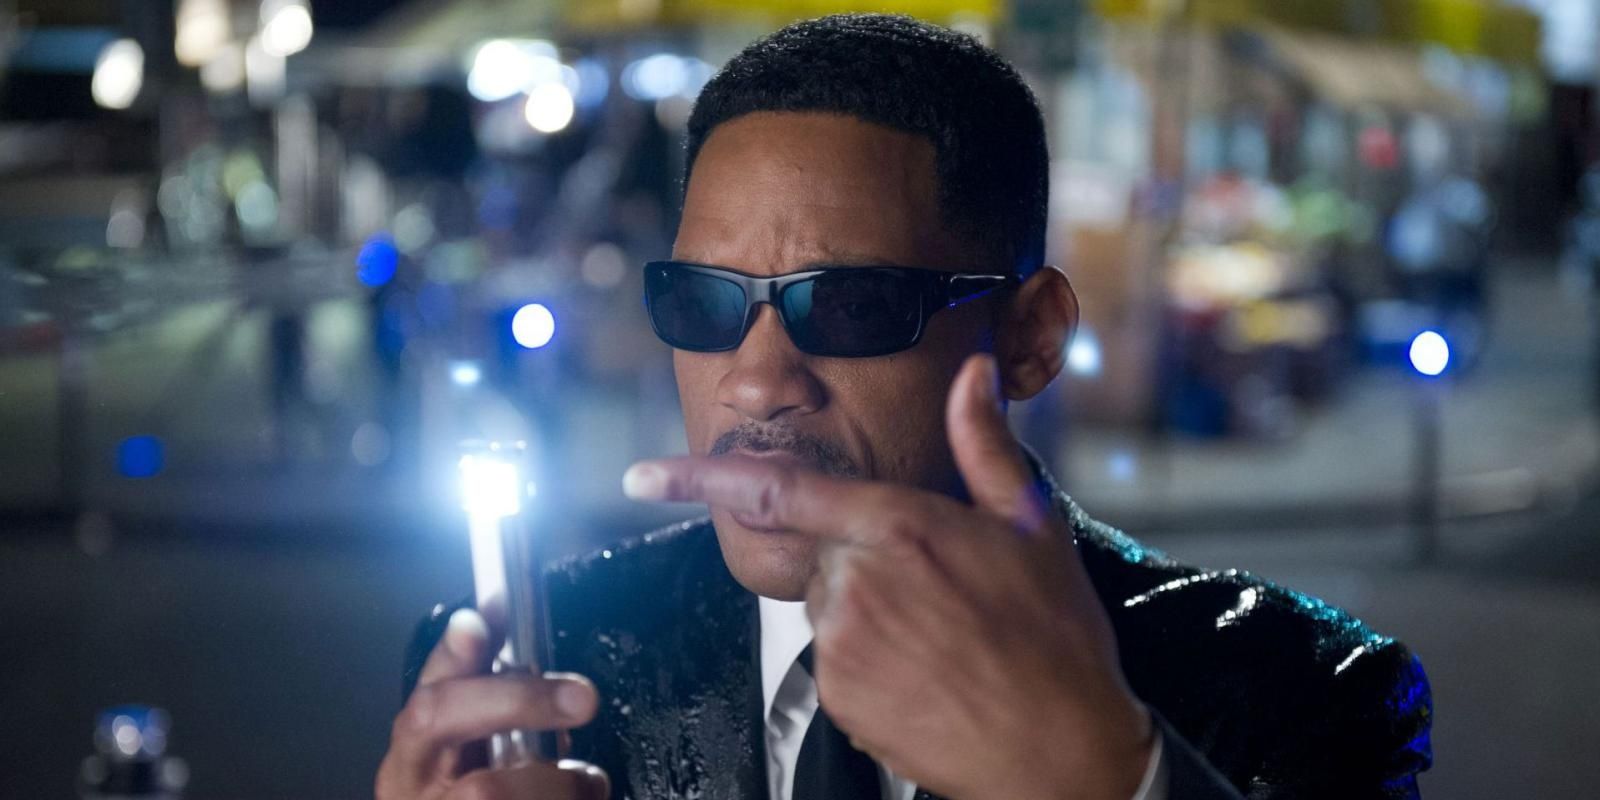 Men In Black 5 Reasons The Franchise Deserves Another Chance (& 5 Why It Should Die)